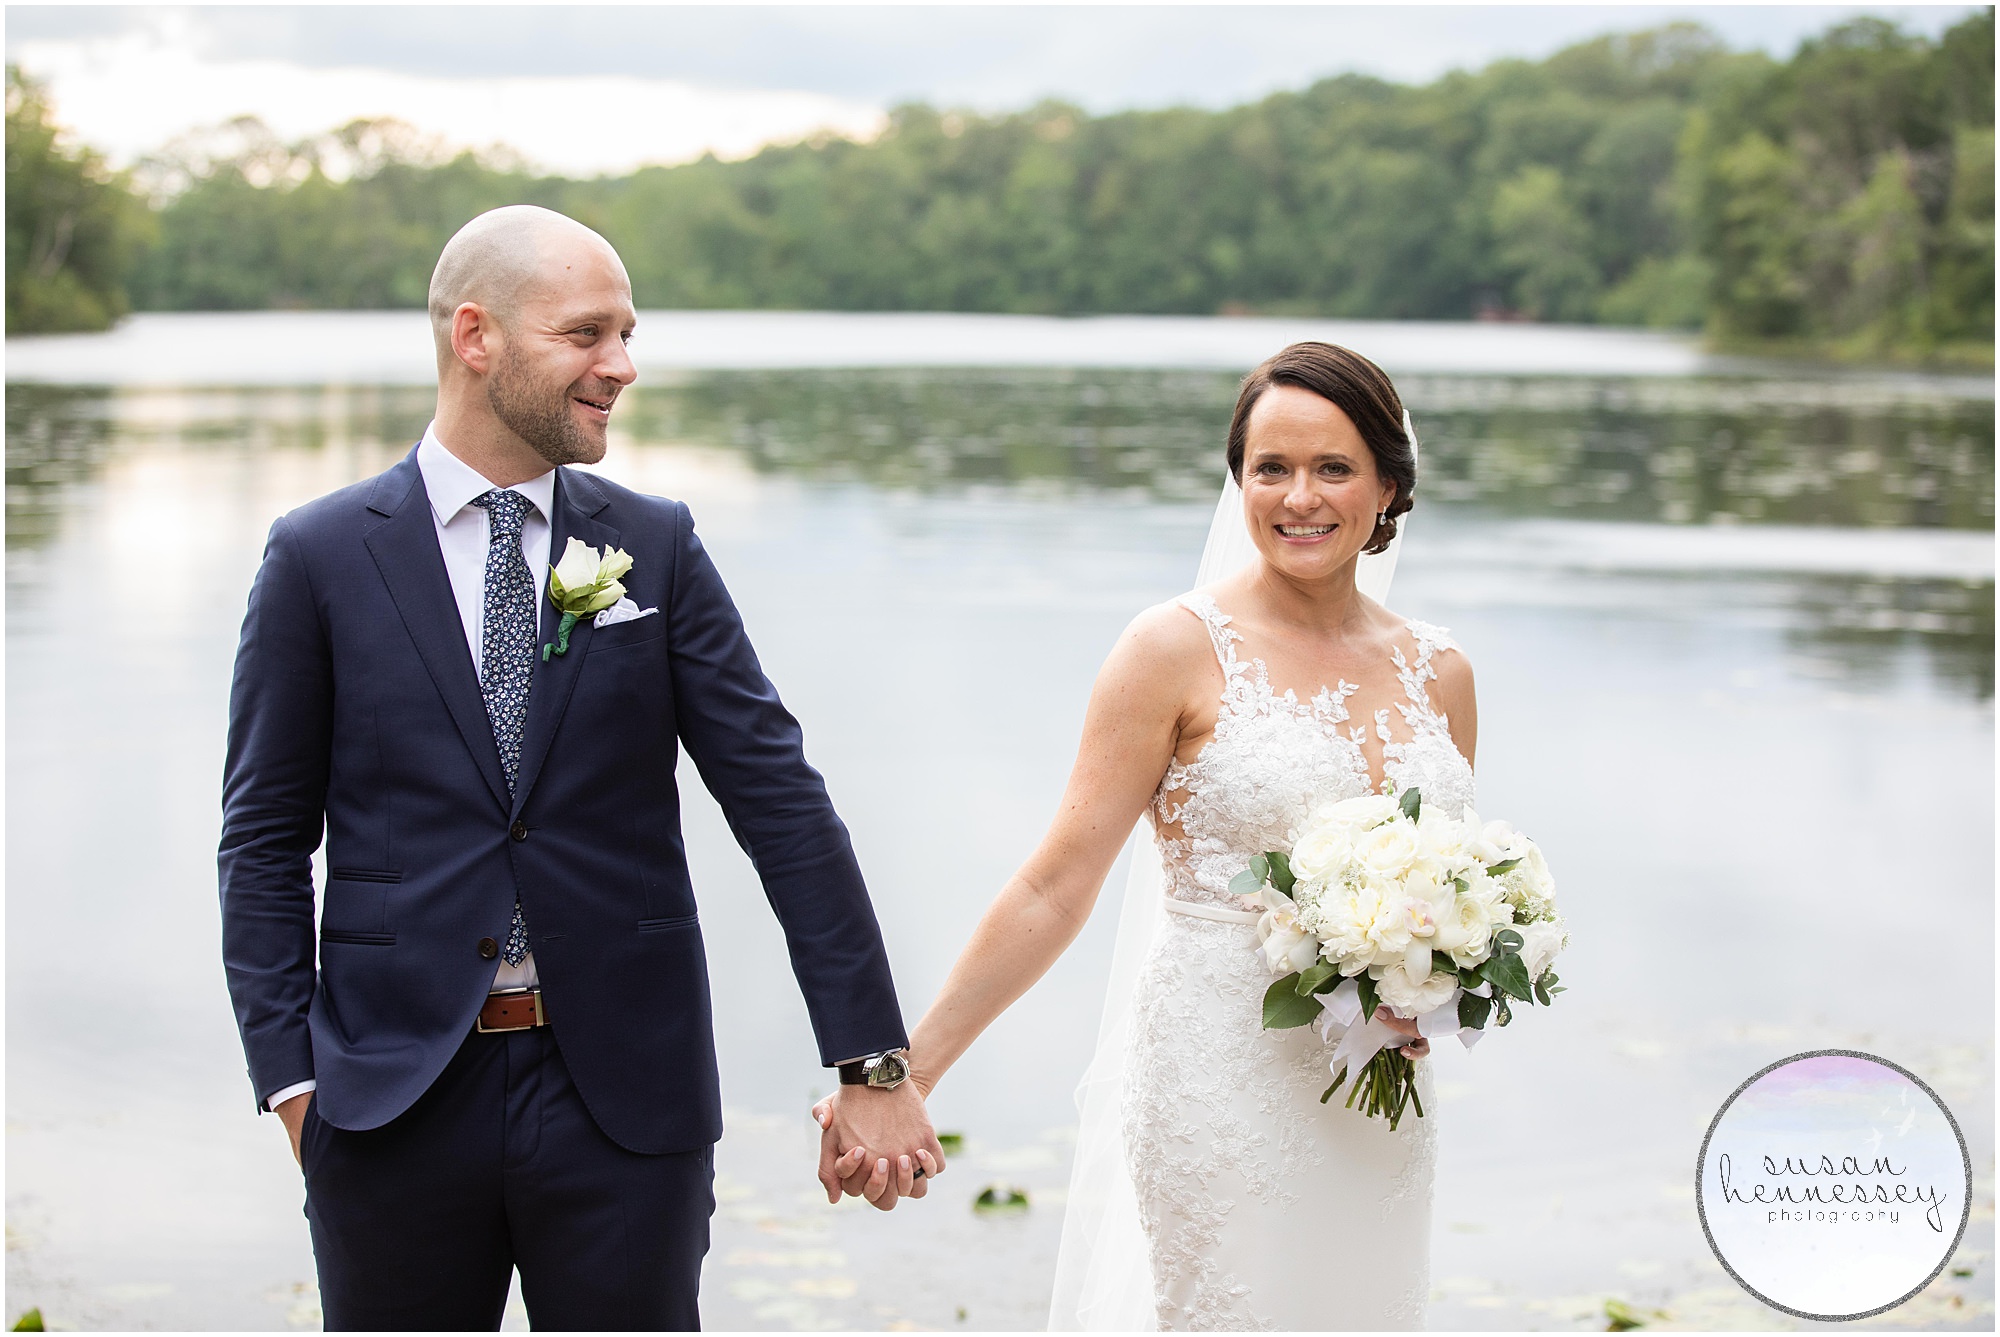 Summer wedding at family lake house in South Jersey